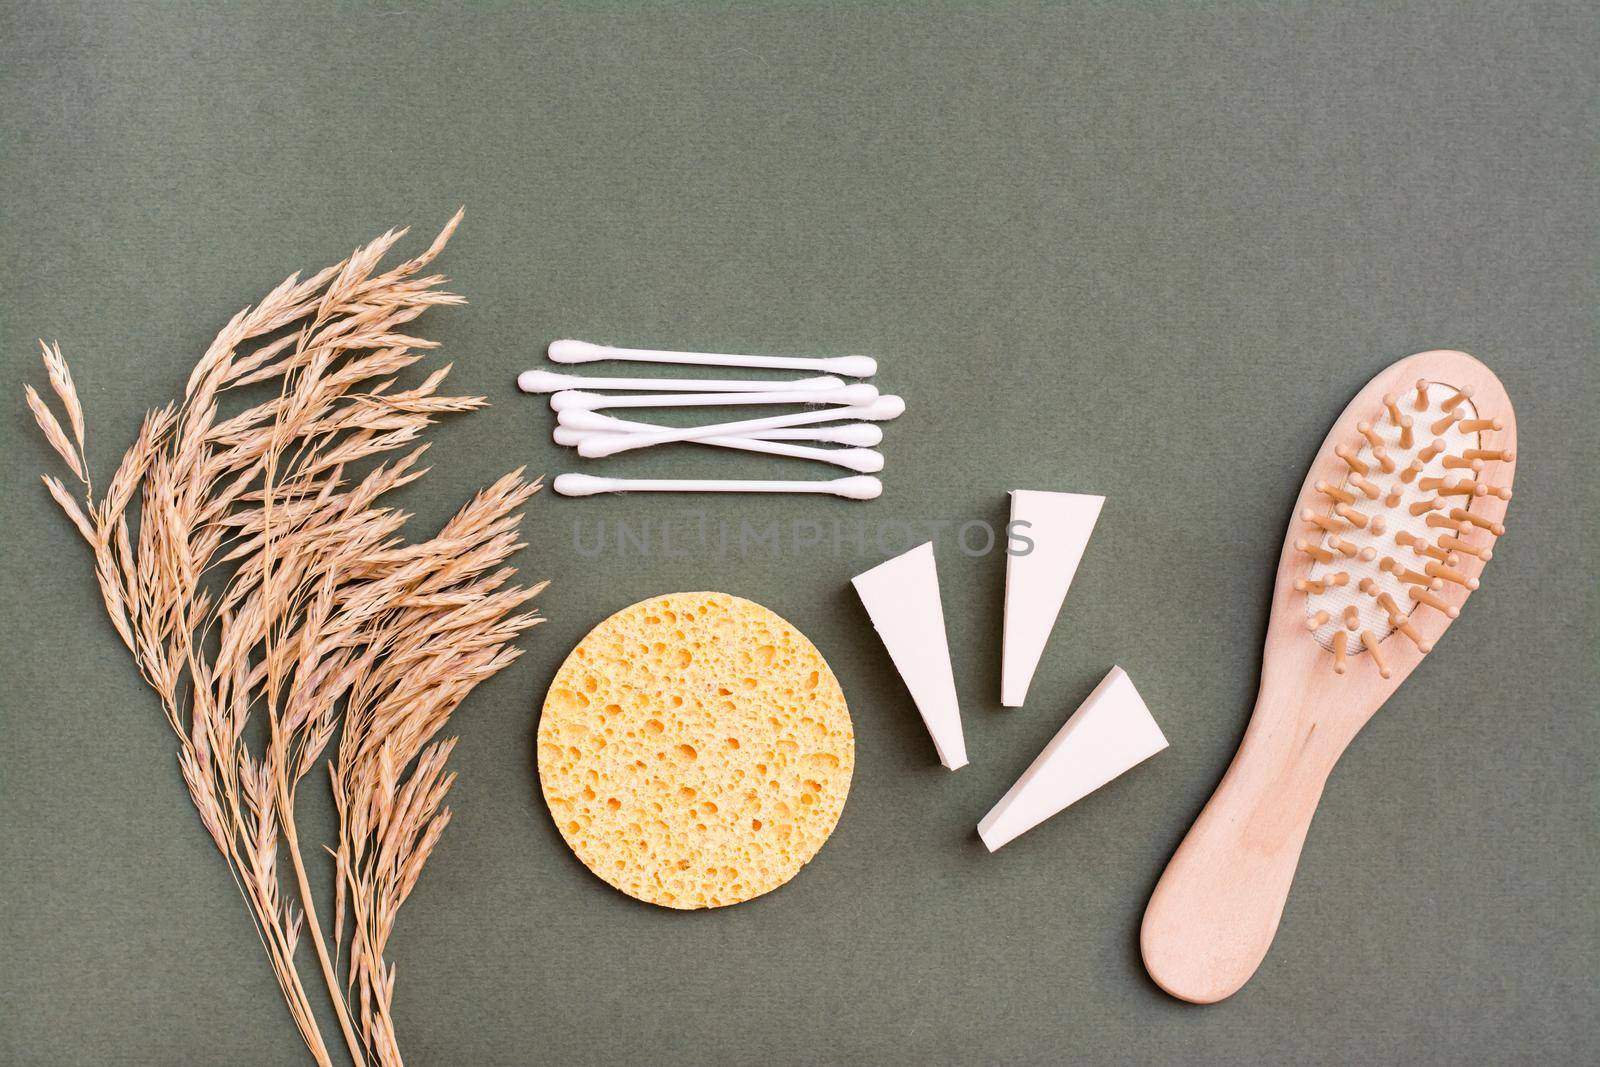 Makeup items. Two types of sponges, cotton swabs, comb and ears of grass on a green background